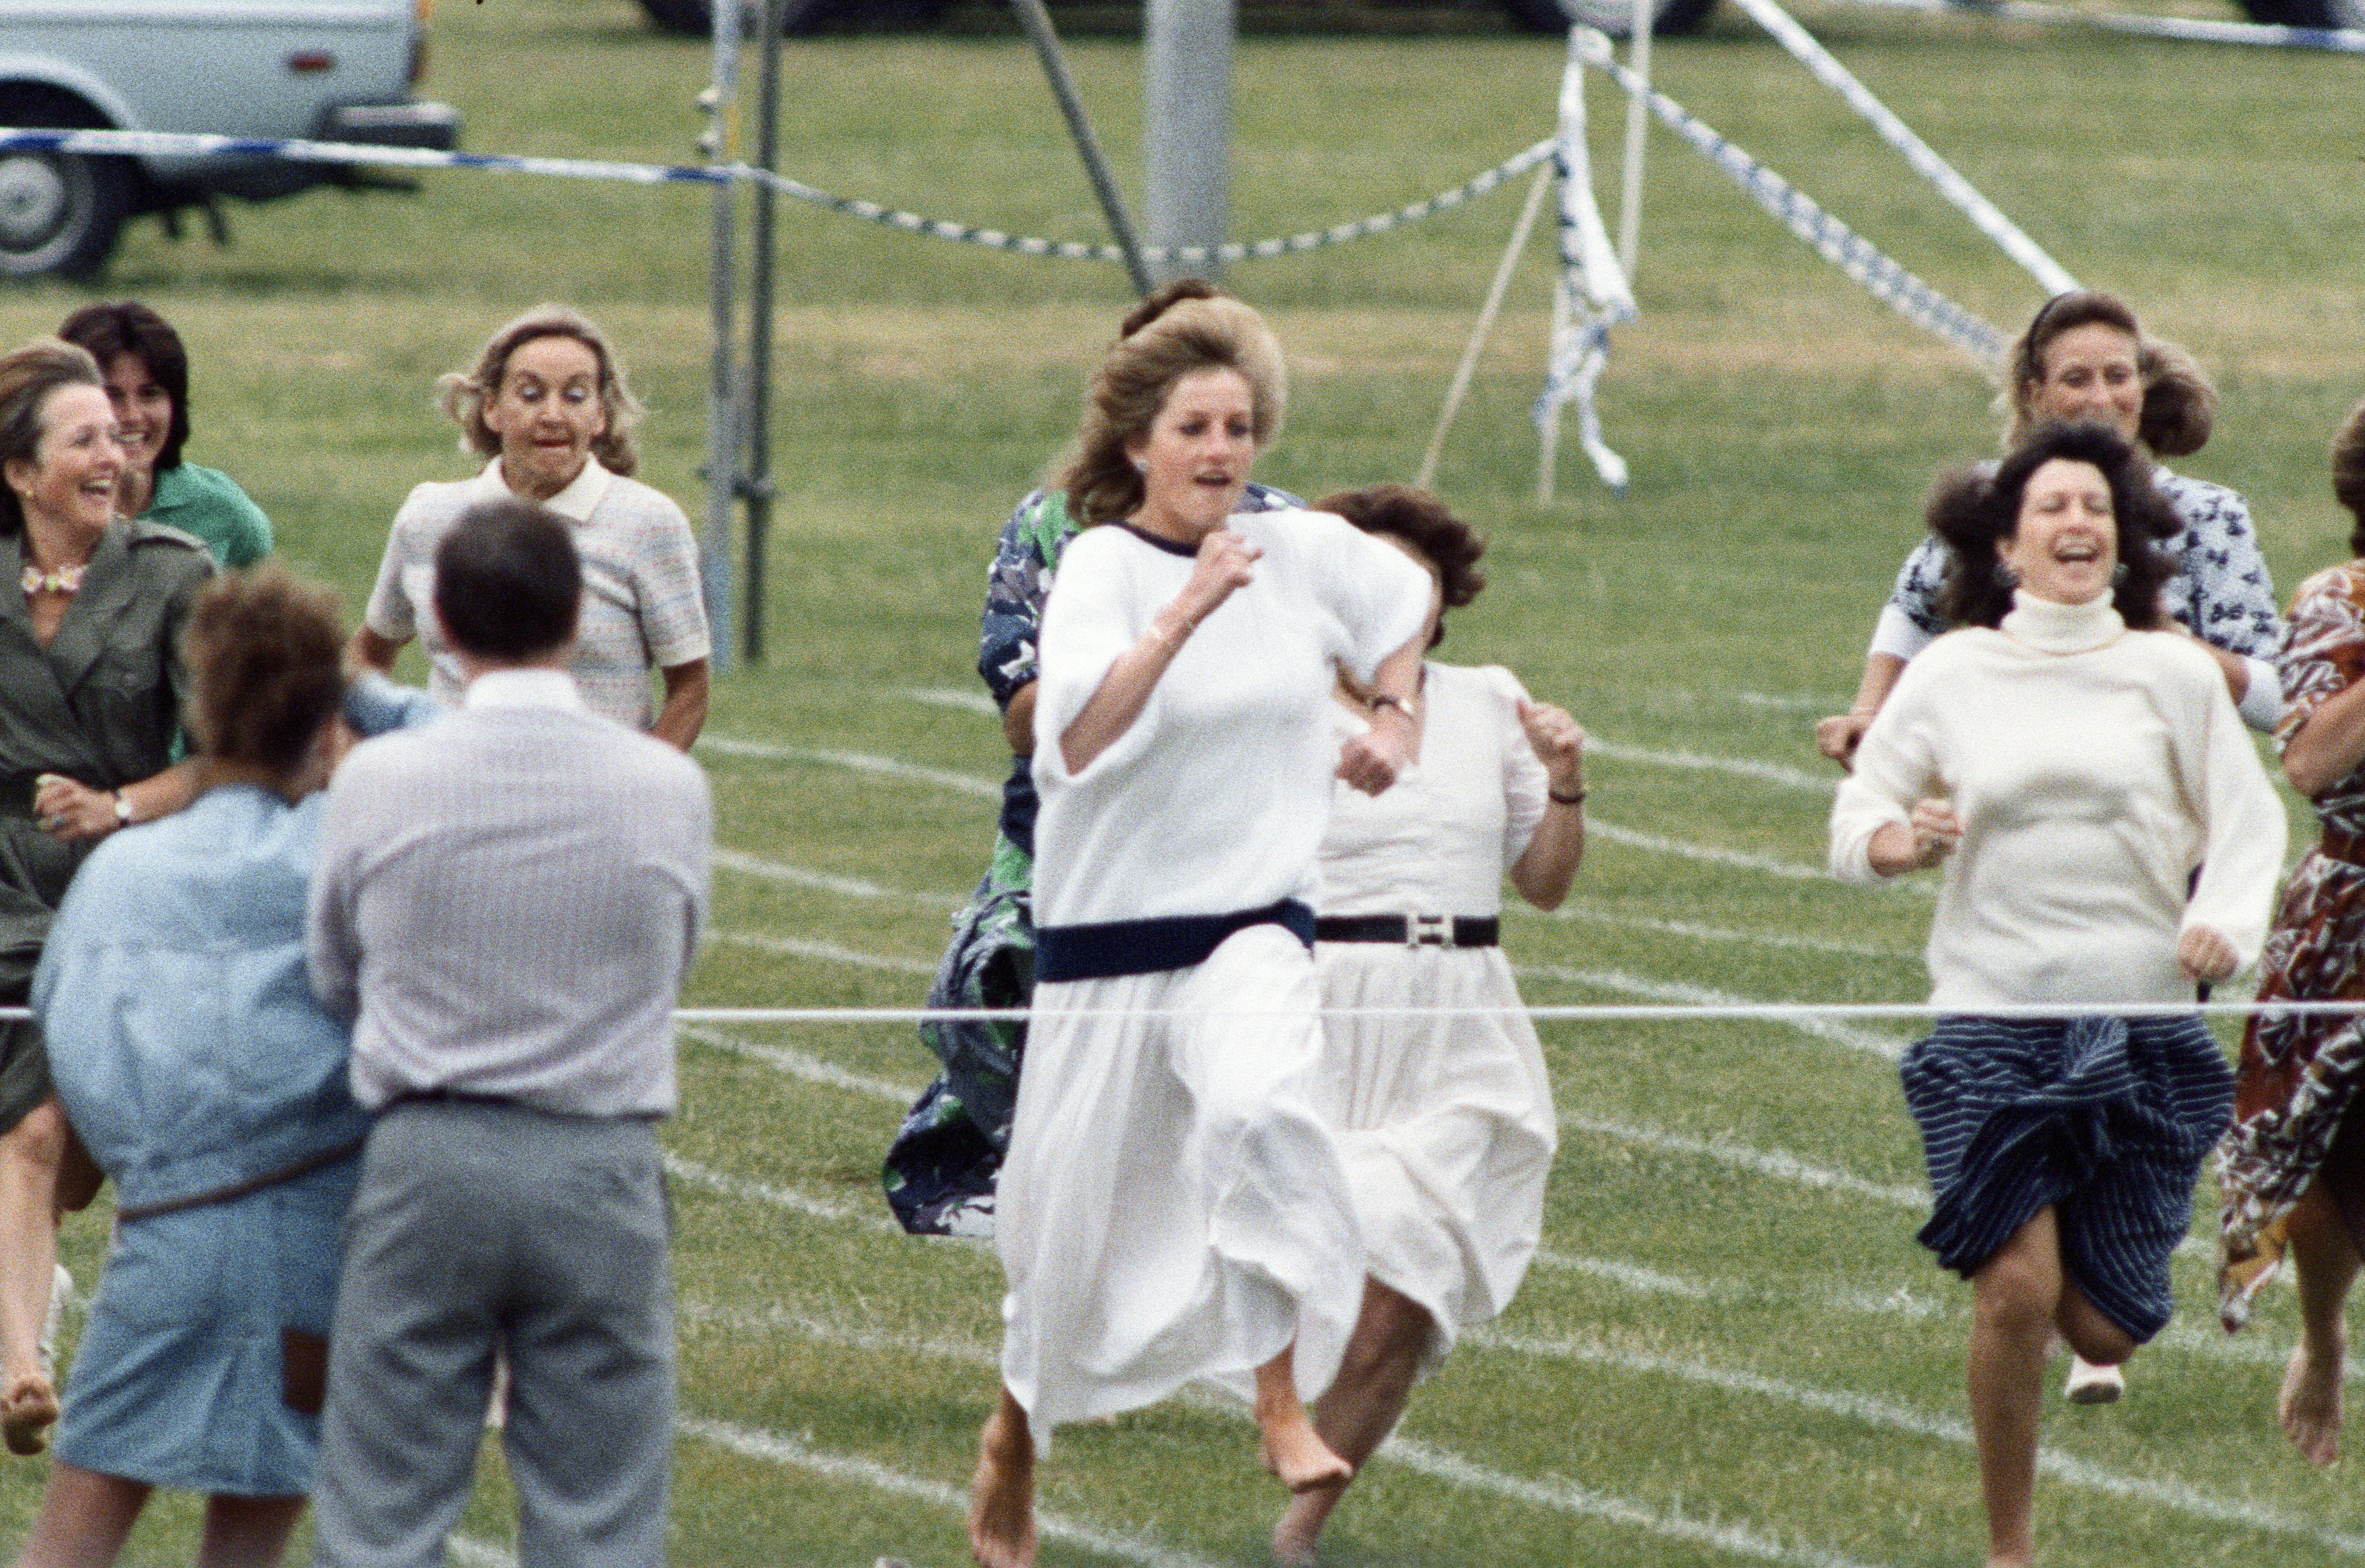 Princess Diana participates in a school race at her sons' school in 1989. | Source: Getty Images